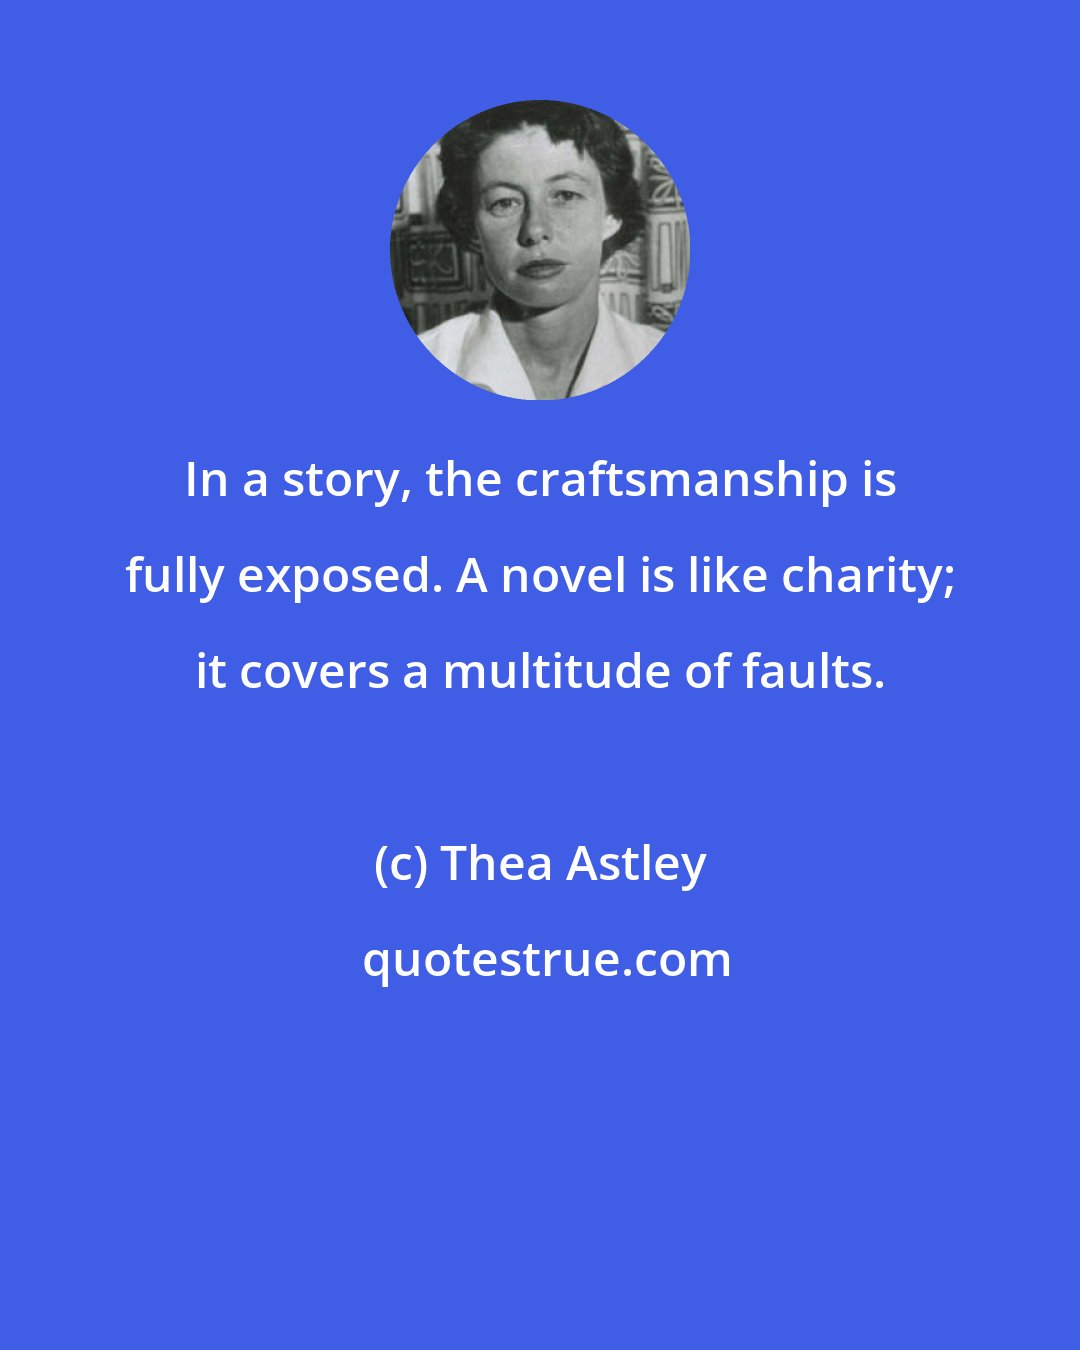 Thea Astley: In a story, the craftsmanship is fully exposed. A novel is like charity; it covers a multitude of faults.